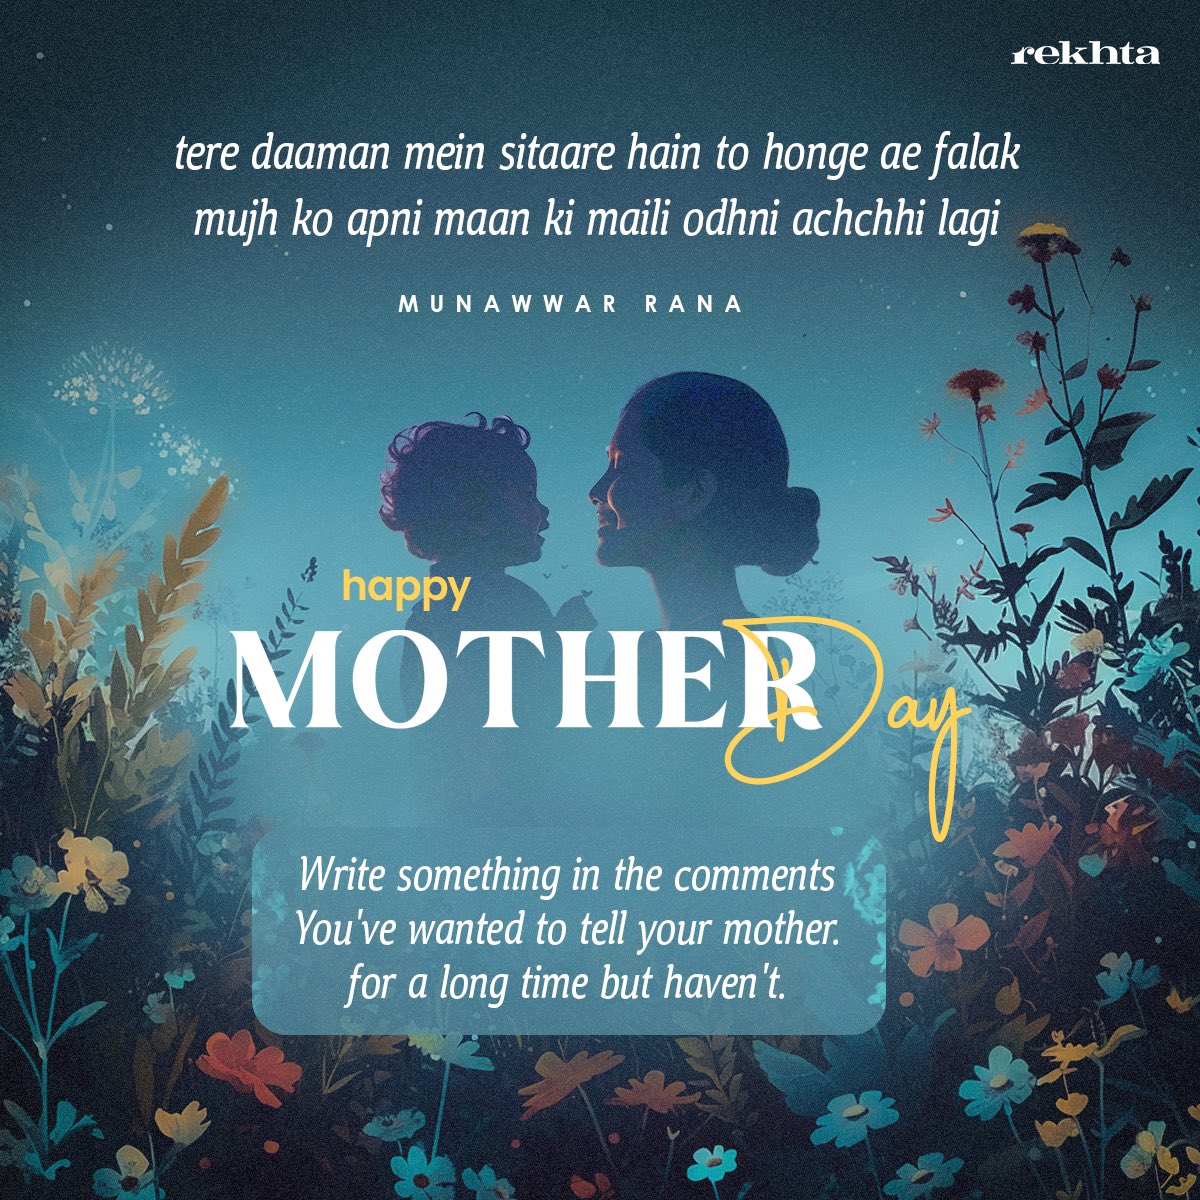 Happy Mother's Day to all the extraordinary women who fill our world with warmth, grace, and boundless affection. #mothersday #rekhta #urdu #urdupoetry